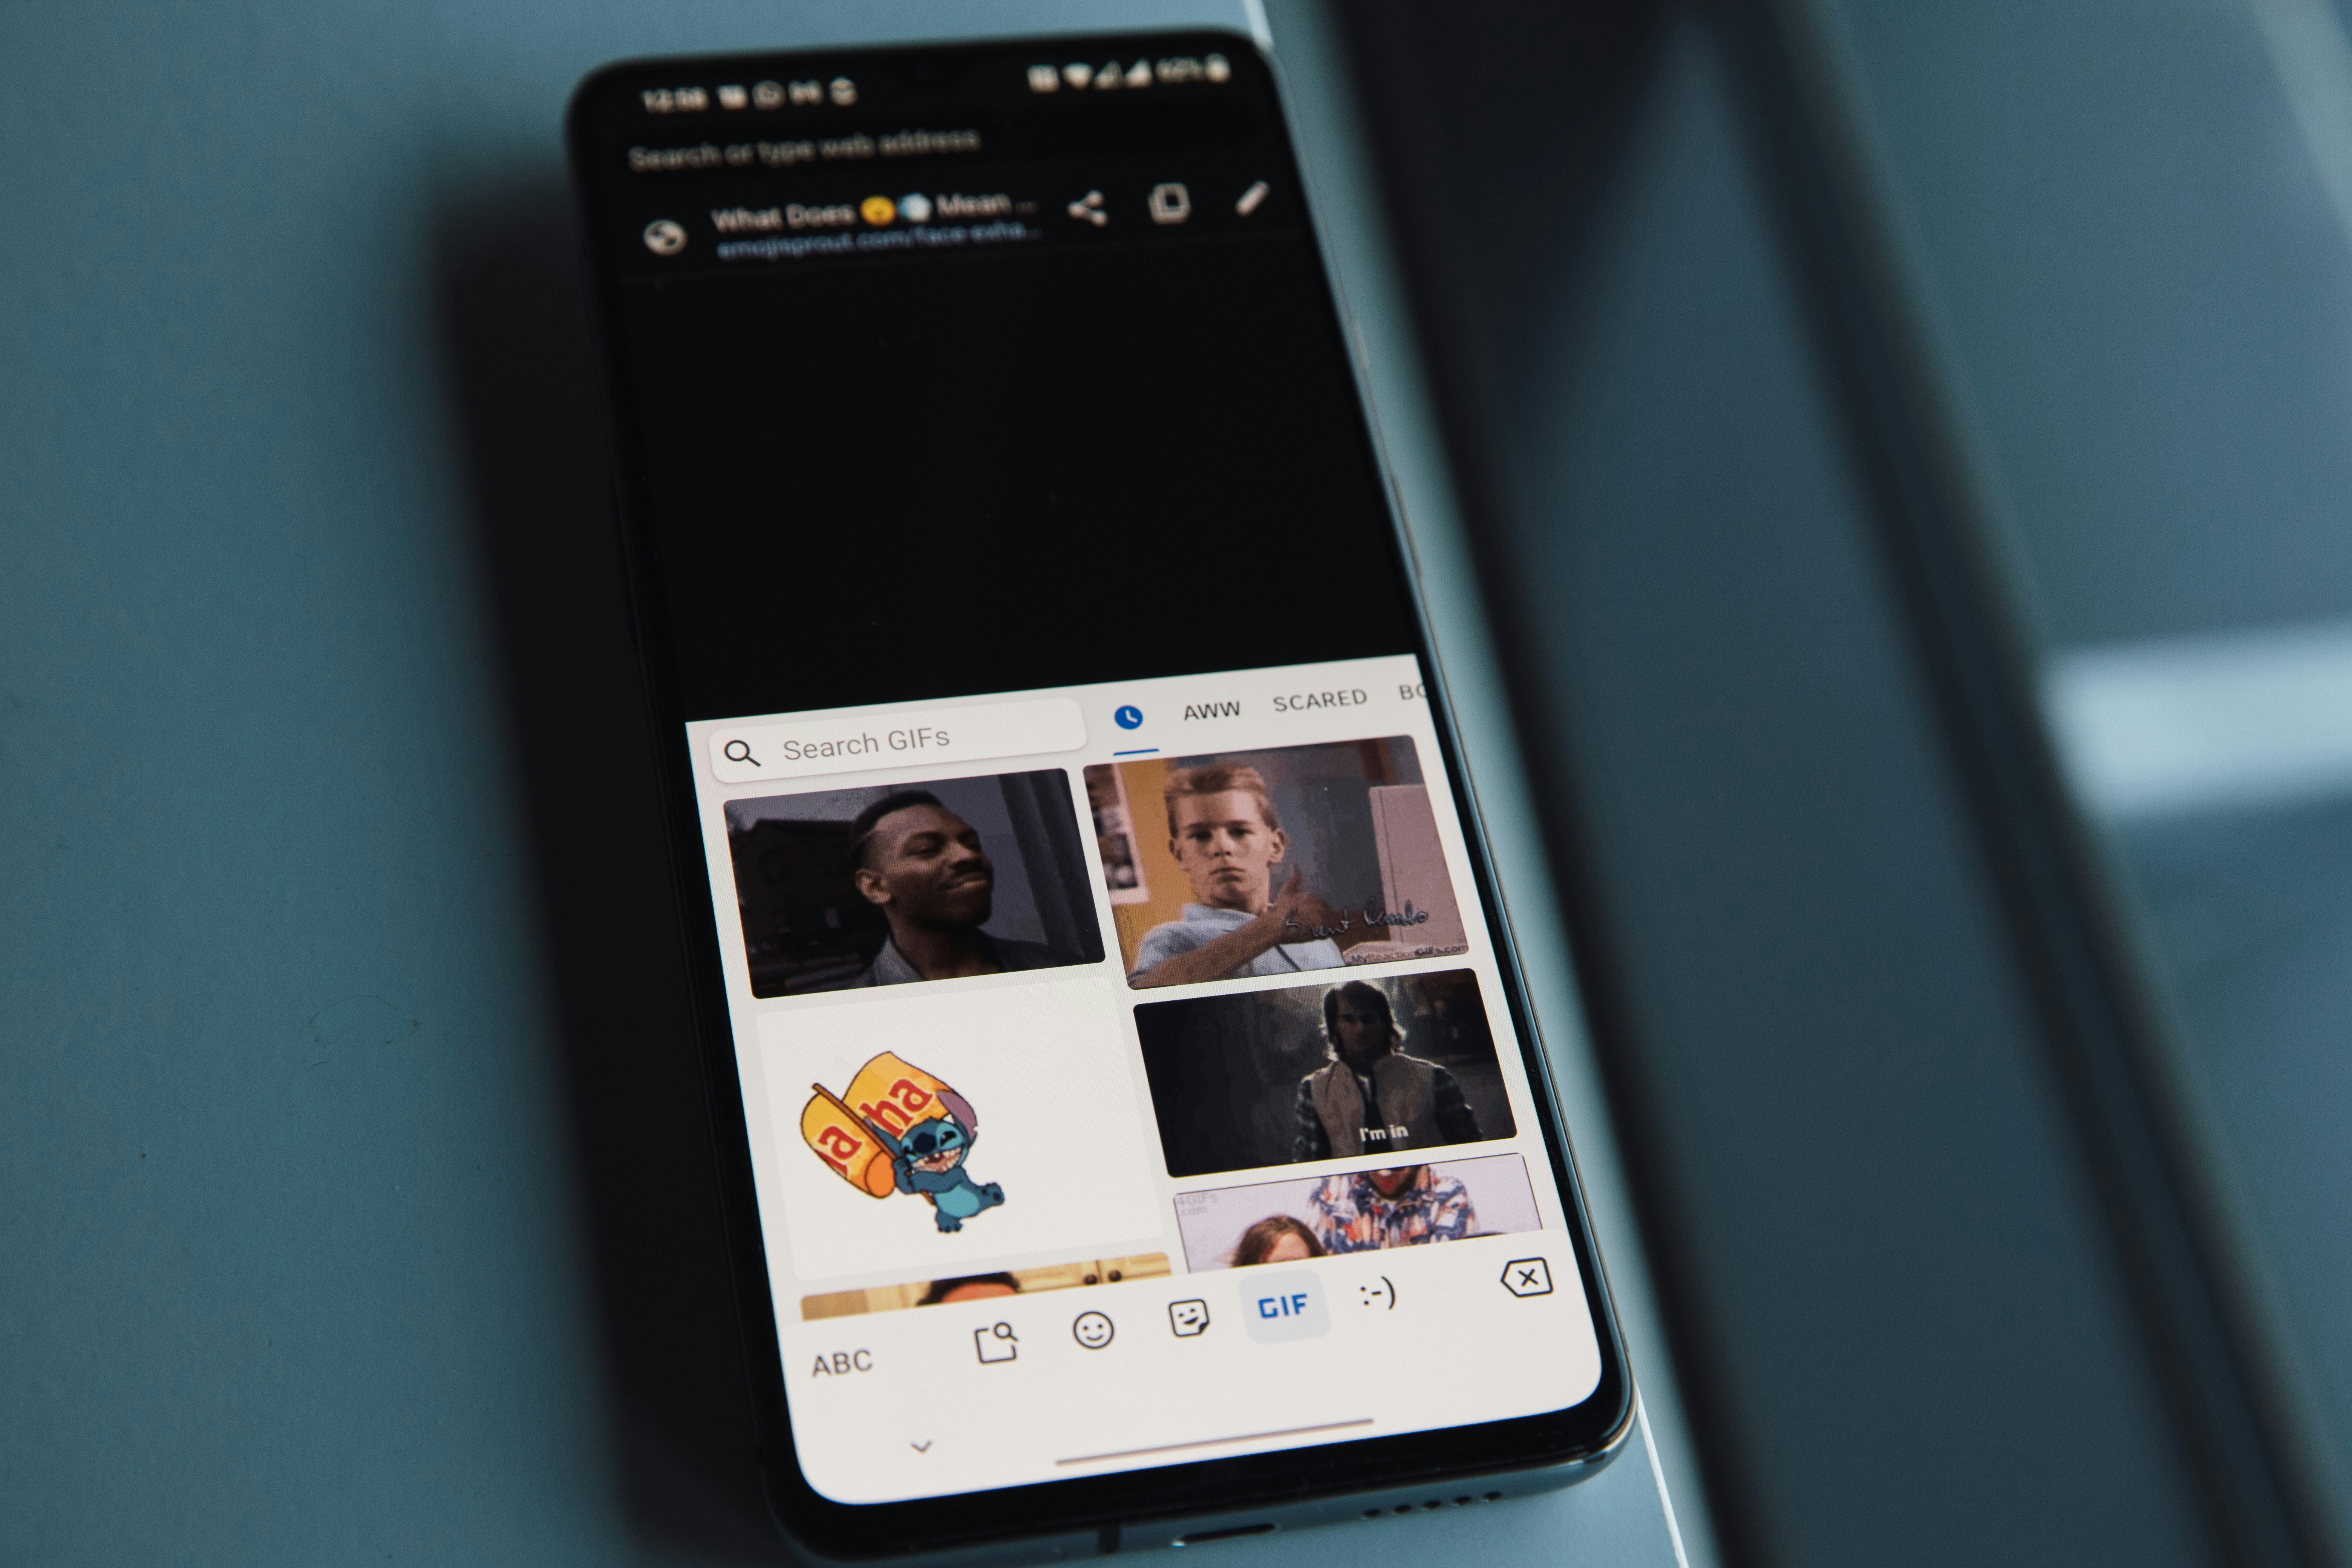 How To Make GIF From  Video On Android & iPhone